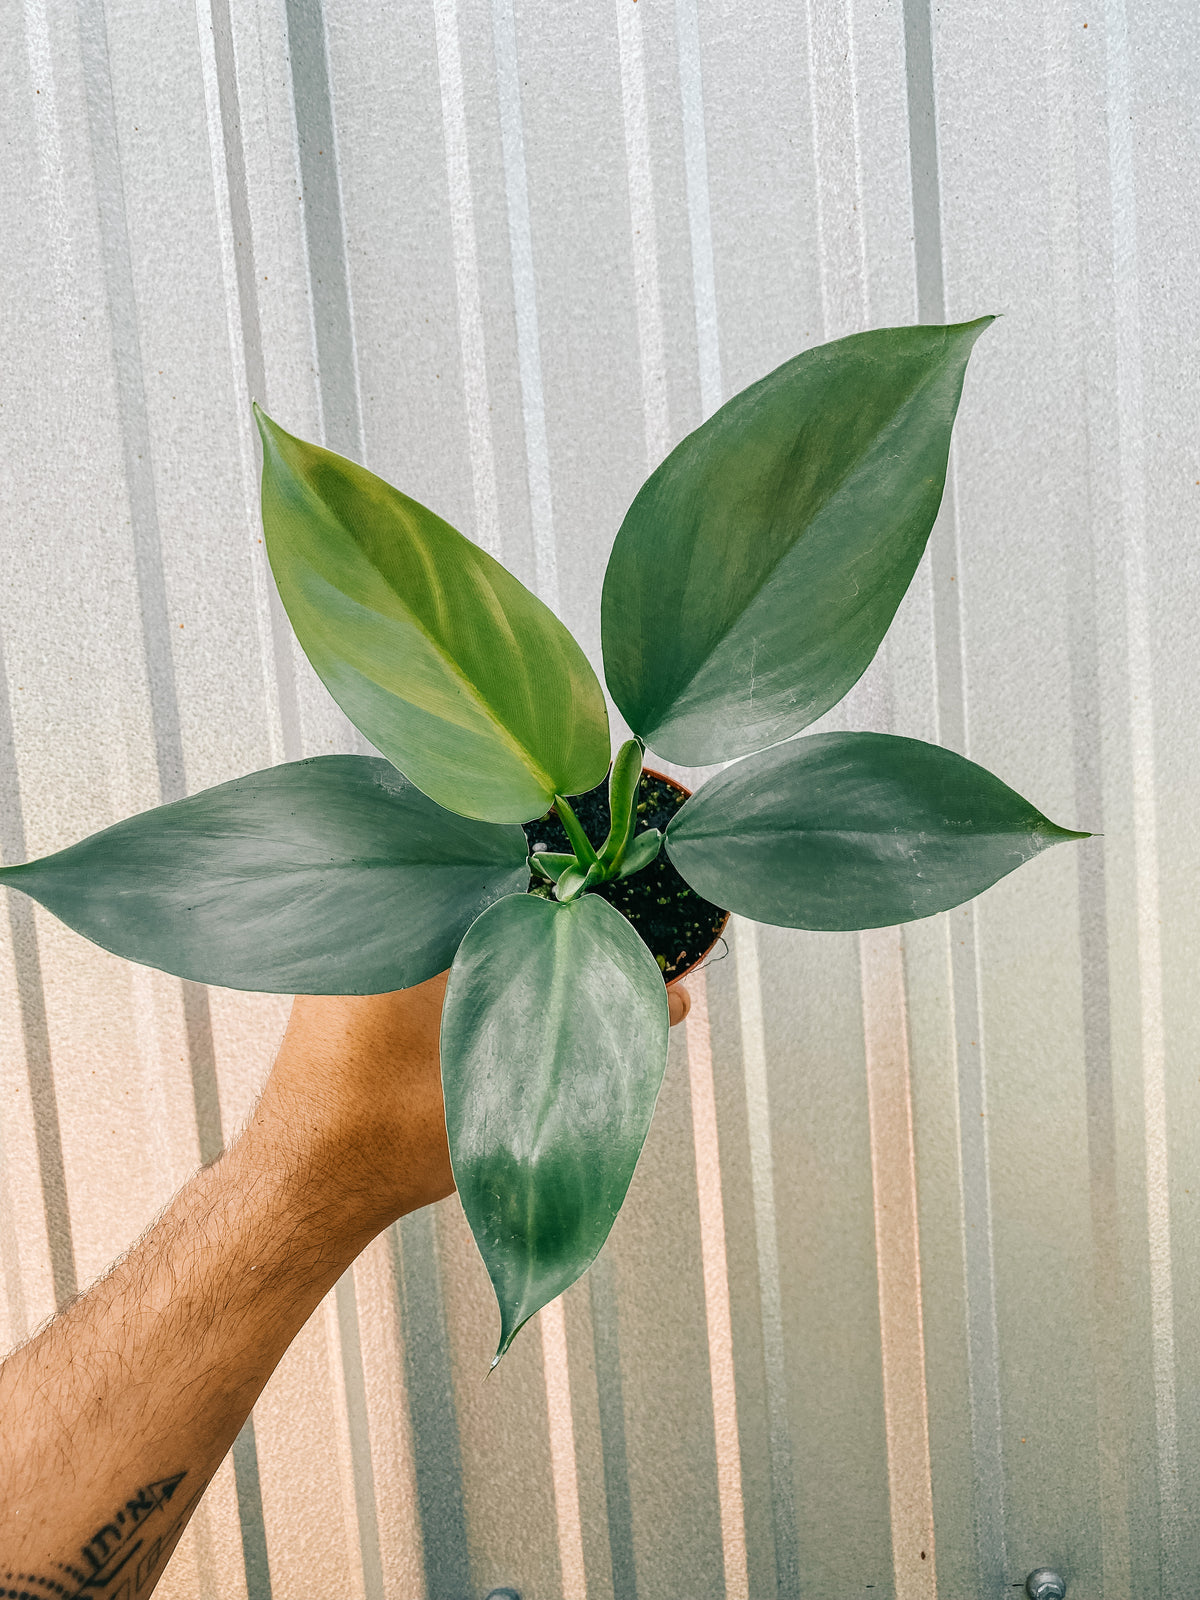 3" Philodendron 'Silver Sword'